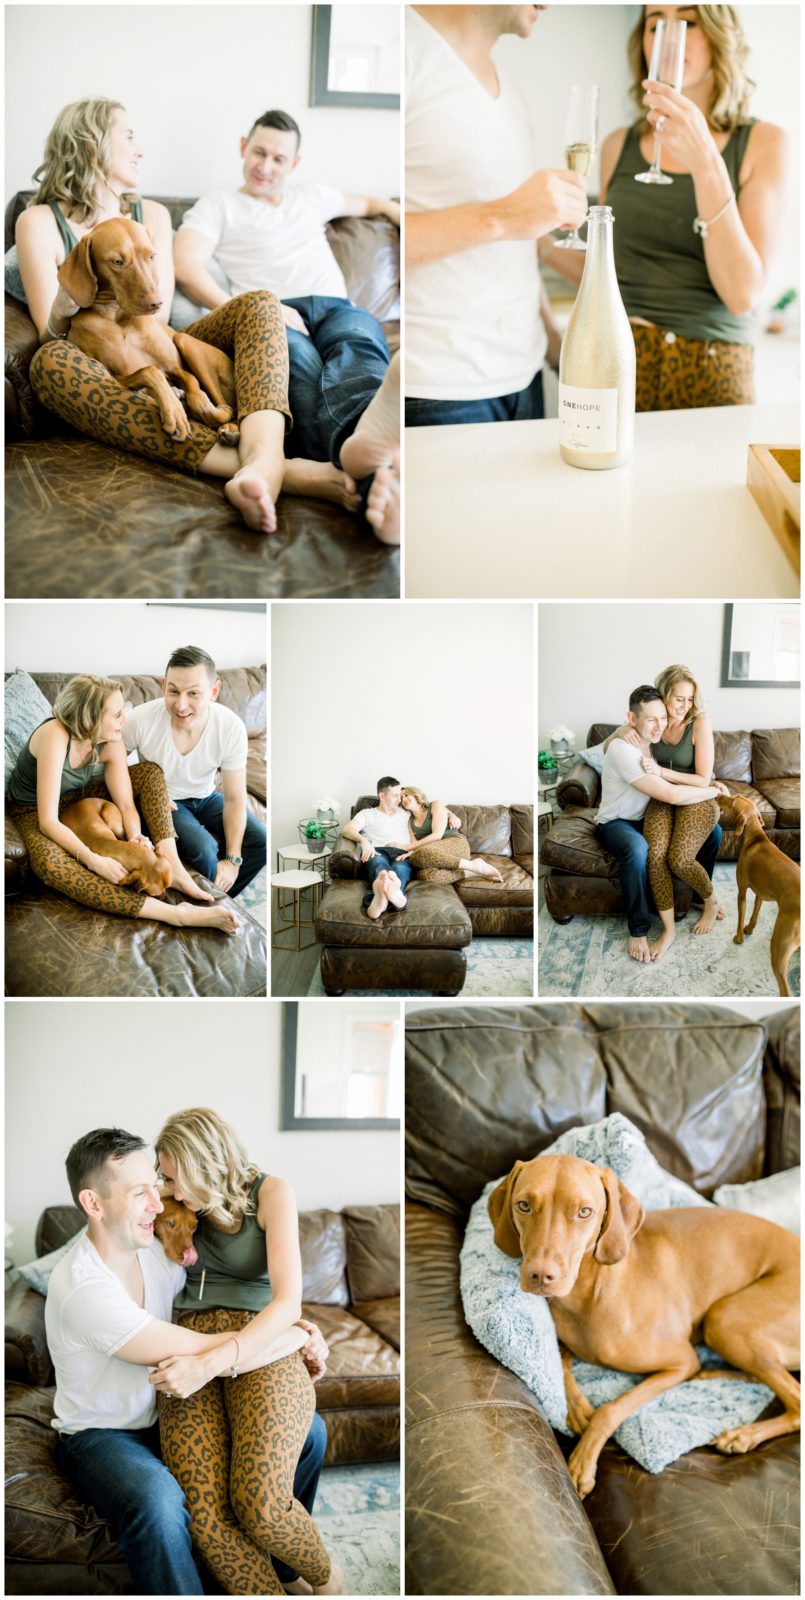 In-home engagement session with puppy and champagne.